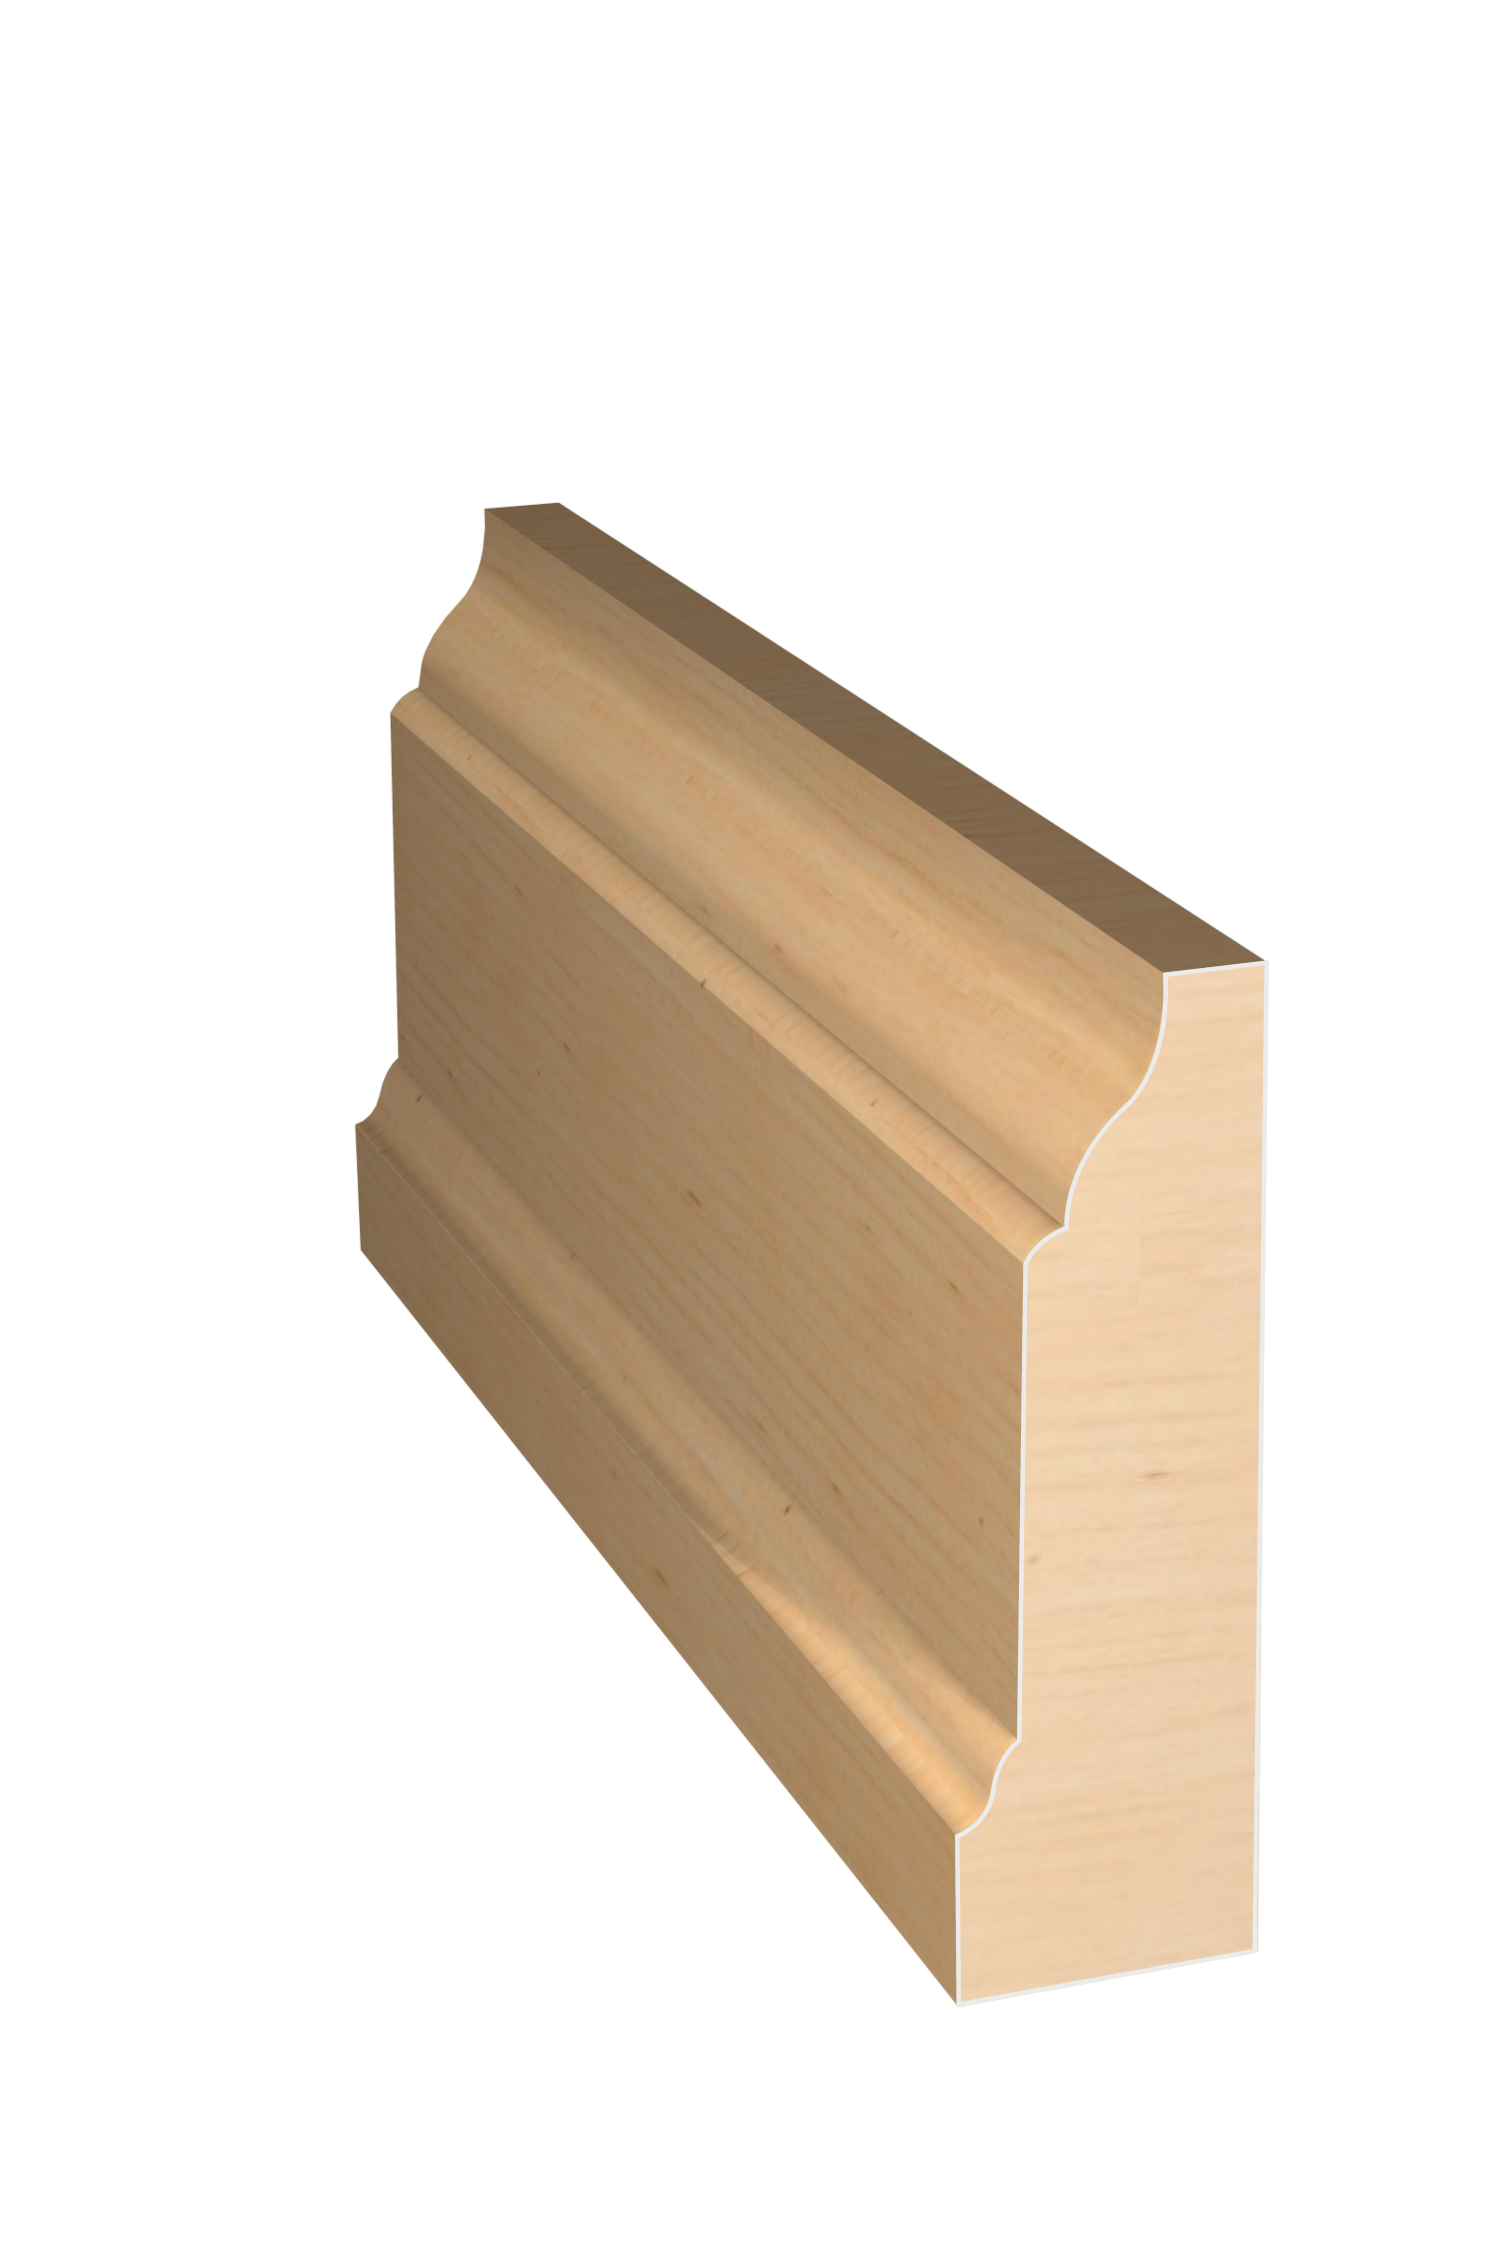 Three dimensional rendering of custom casing wood molding CAPL2583 made by Public Lumber Company in Detroit.